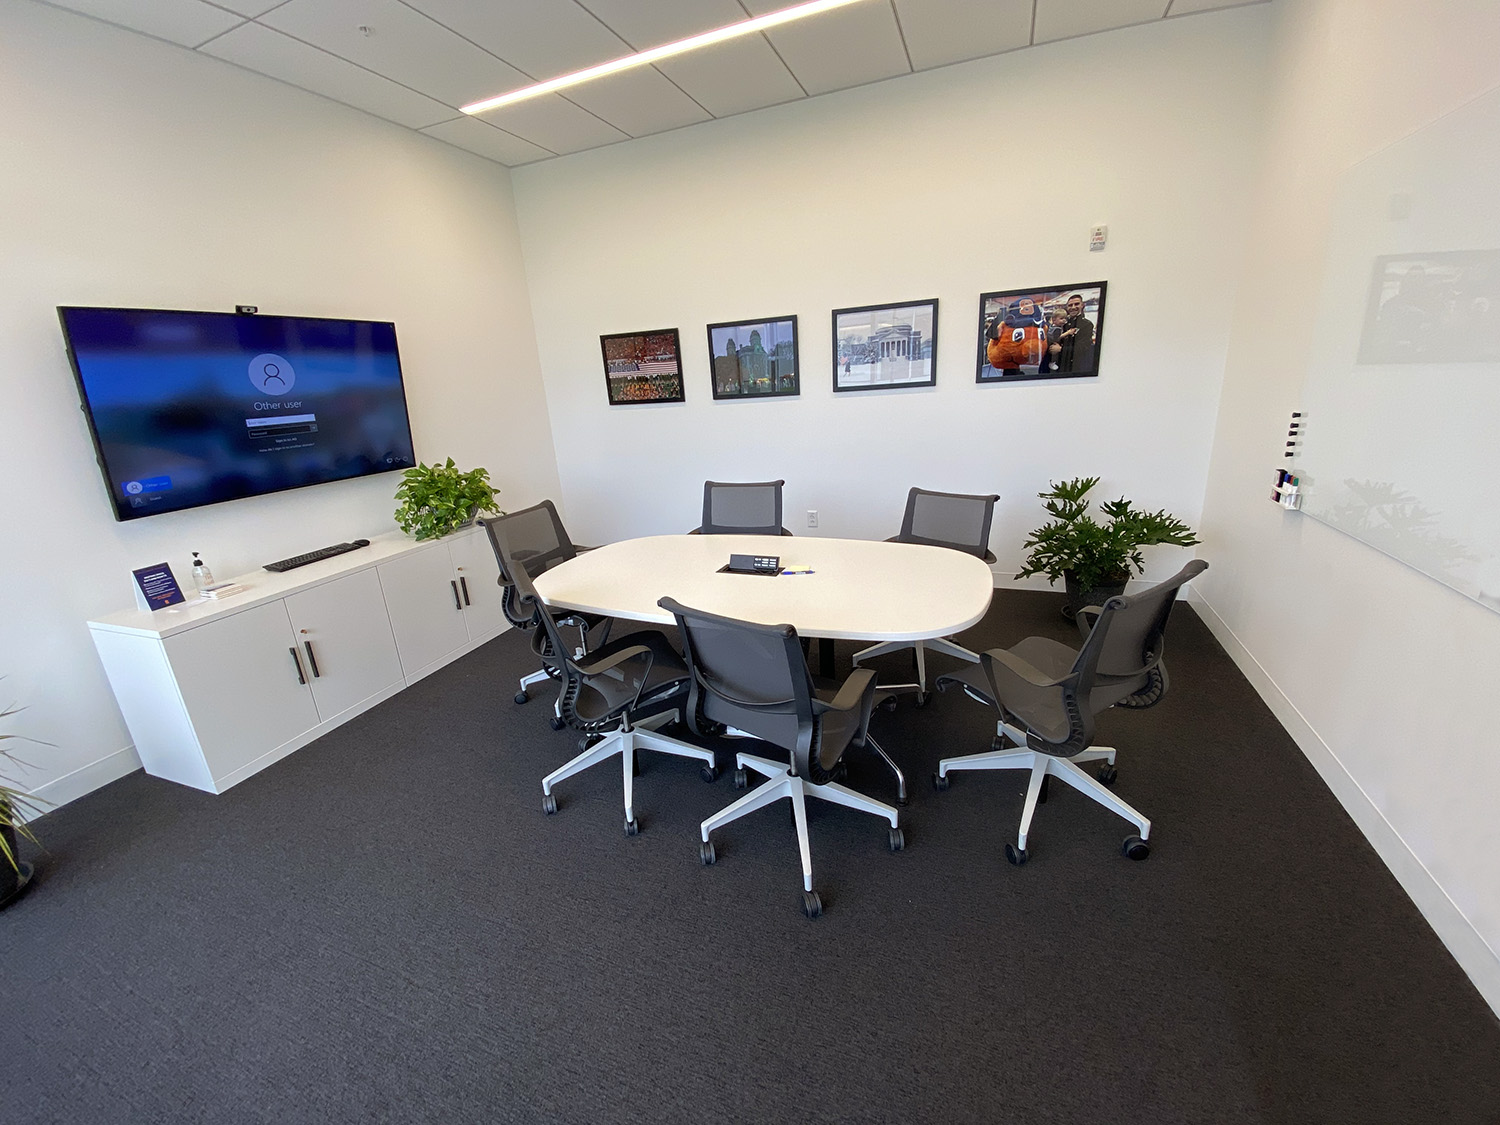 NVRC Conference Room 301 is typical of the more formal meeting spaces within the NVRC.